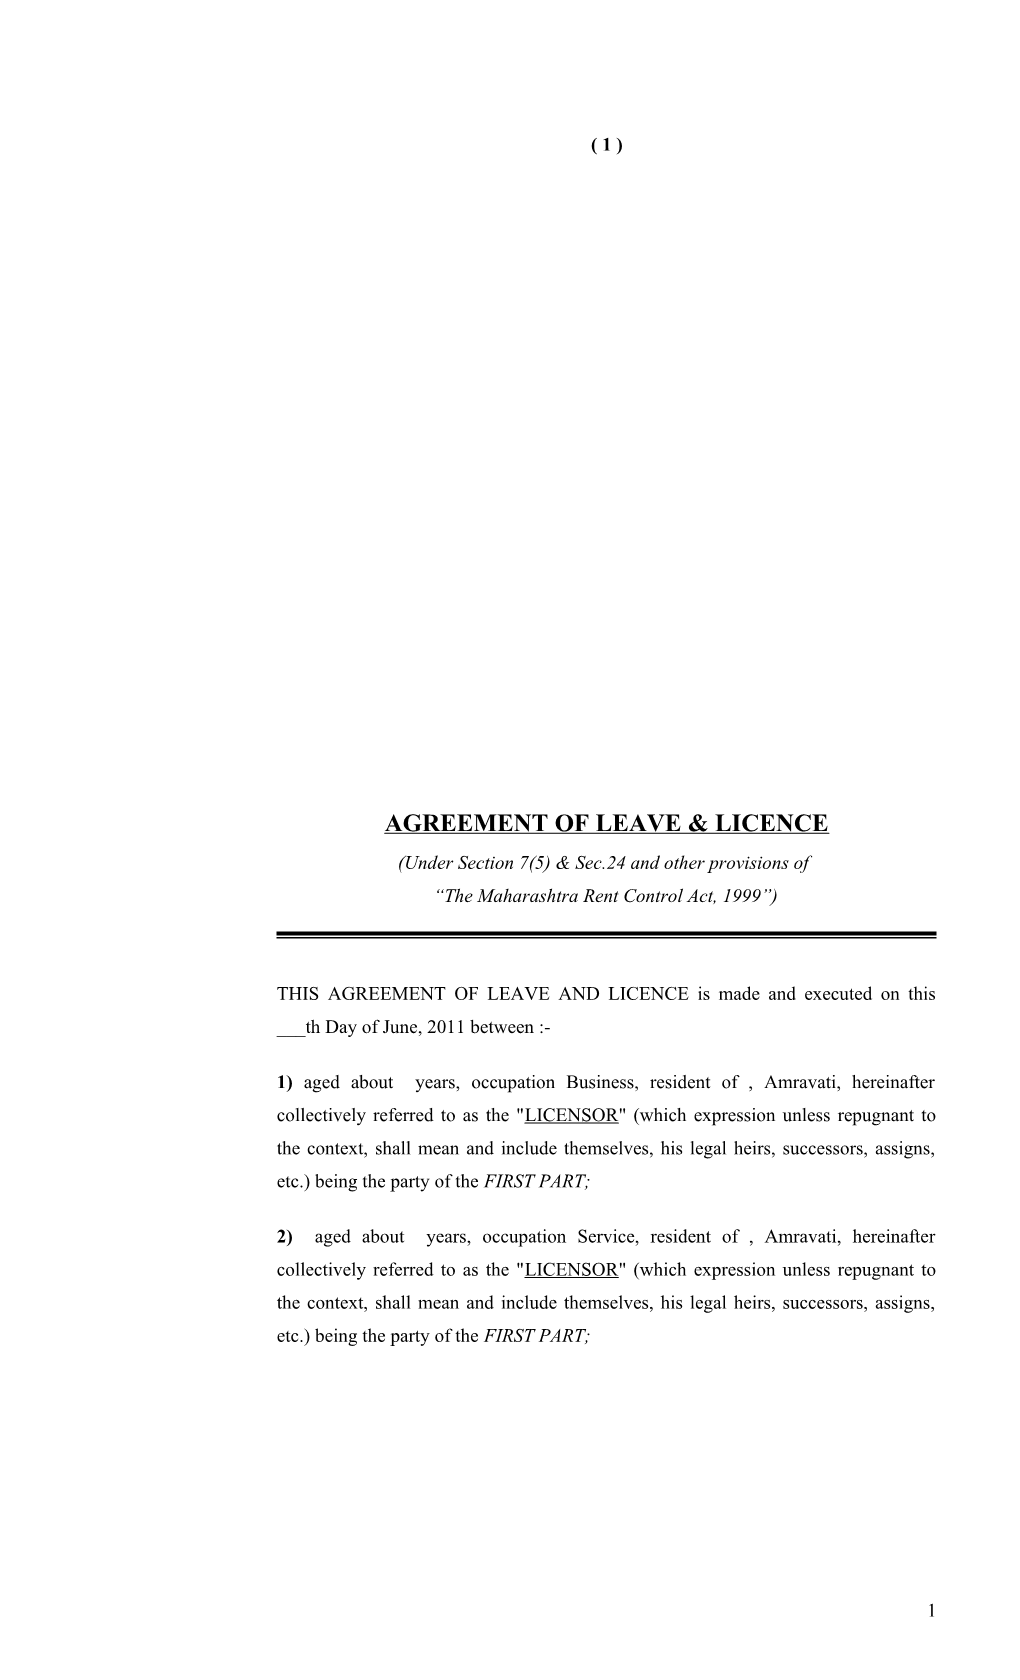 Agreement of Leave & Licence